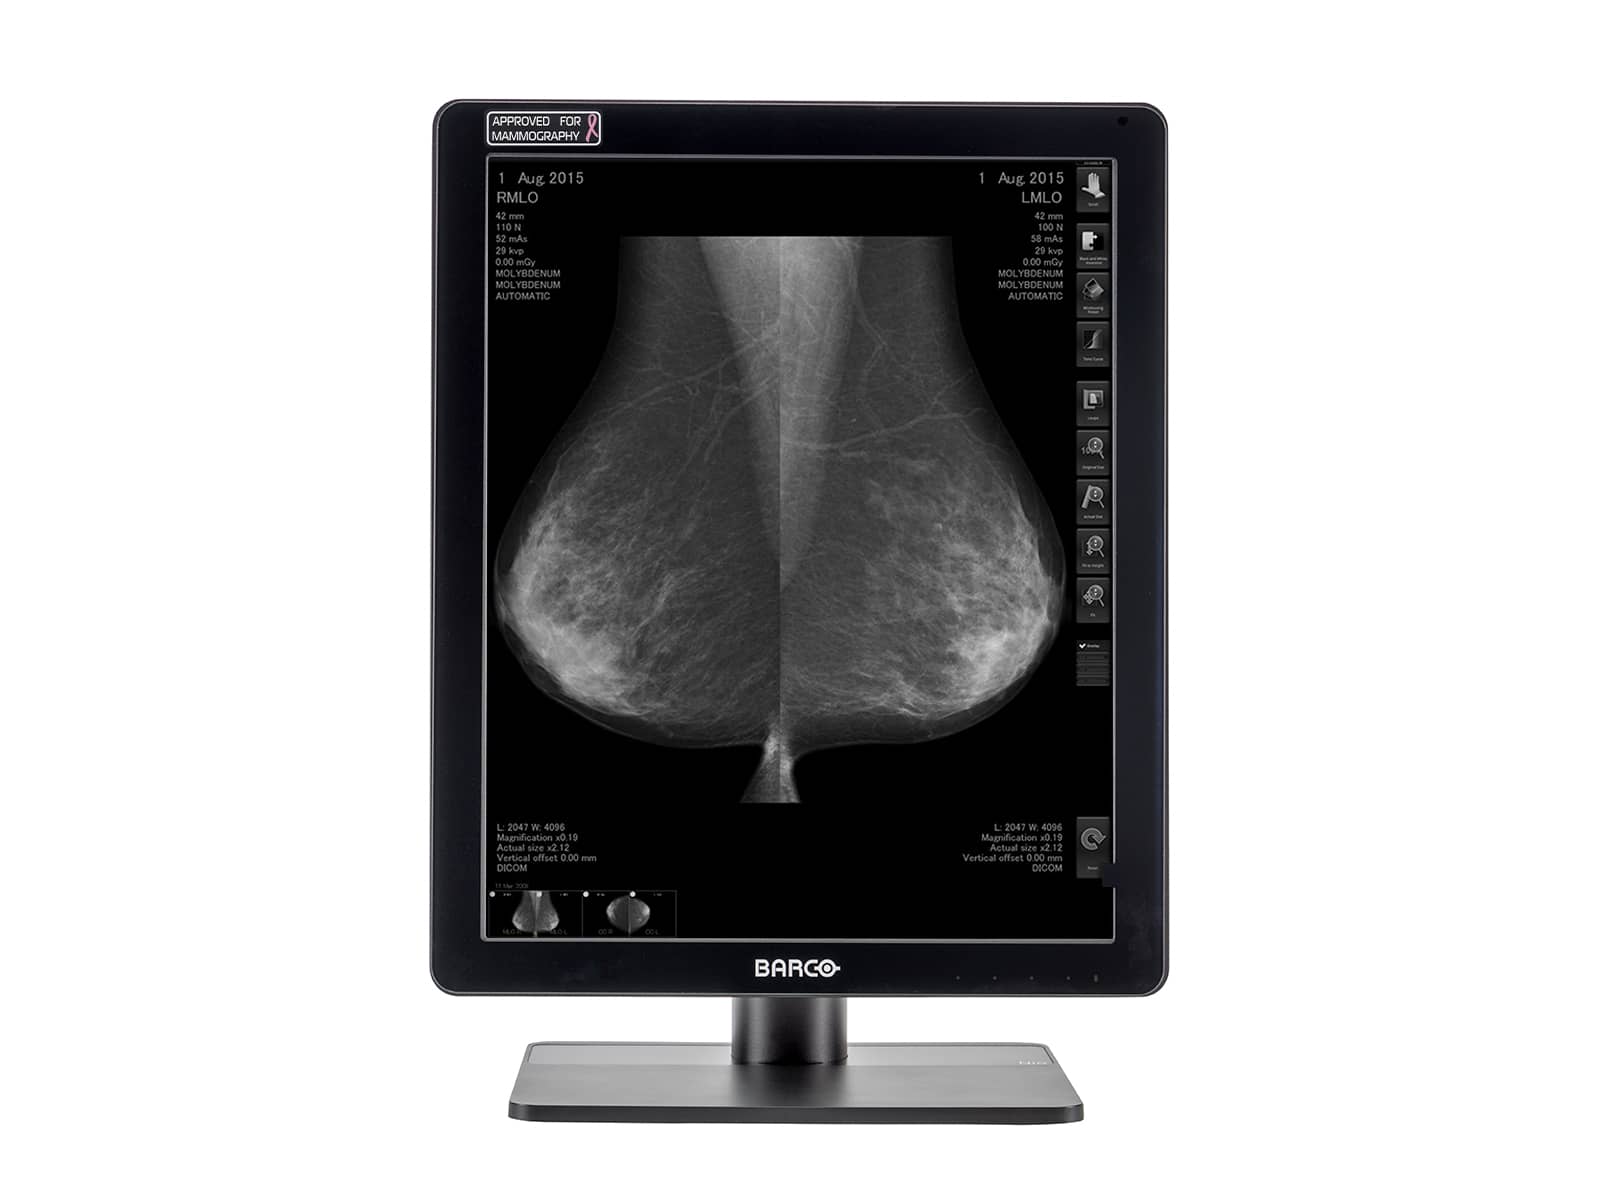 Barco Coronis MDCG-5221 Grayscale LED Mammo 3D-DBT Breast Imaging Display (K9301541A) Monitors.com 